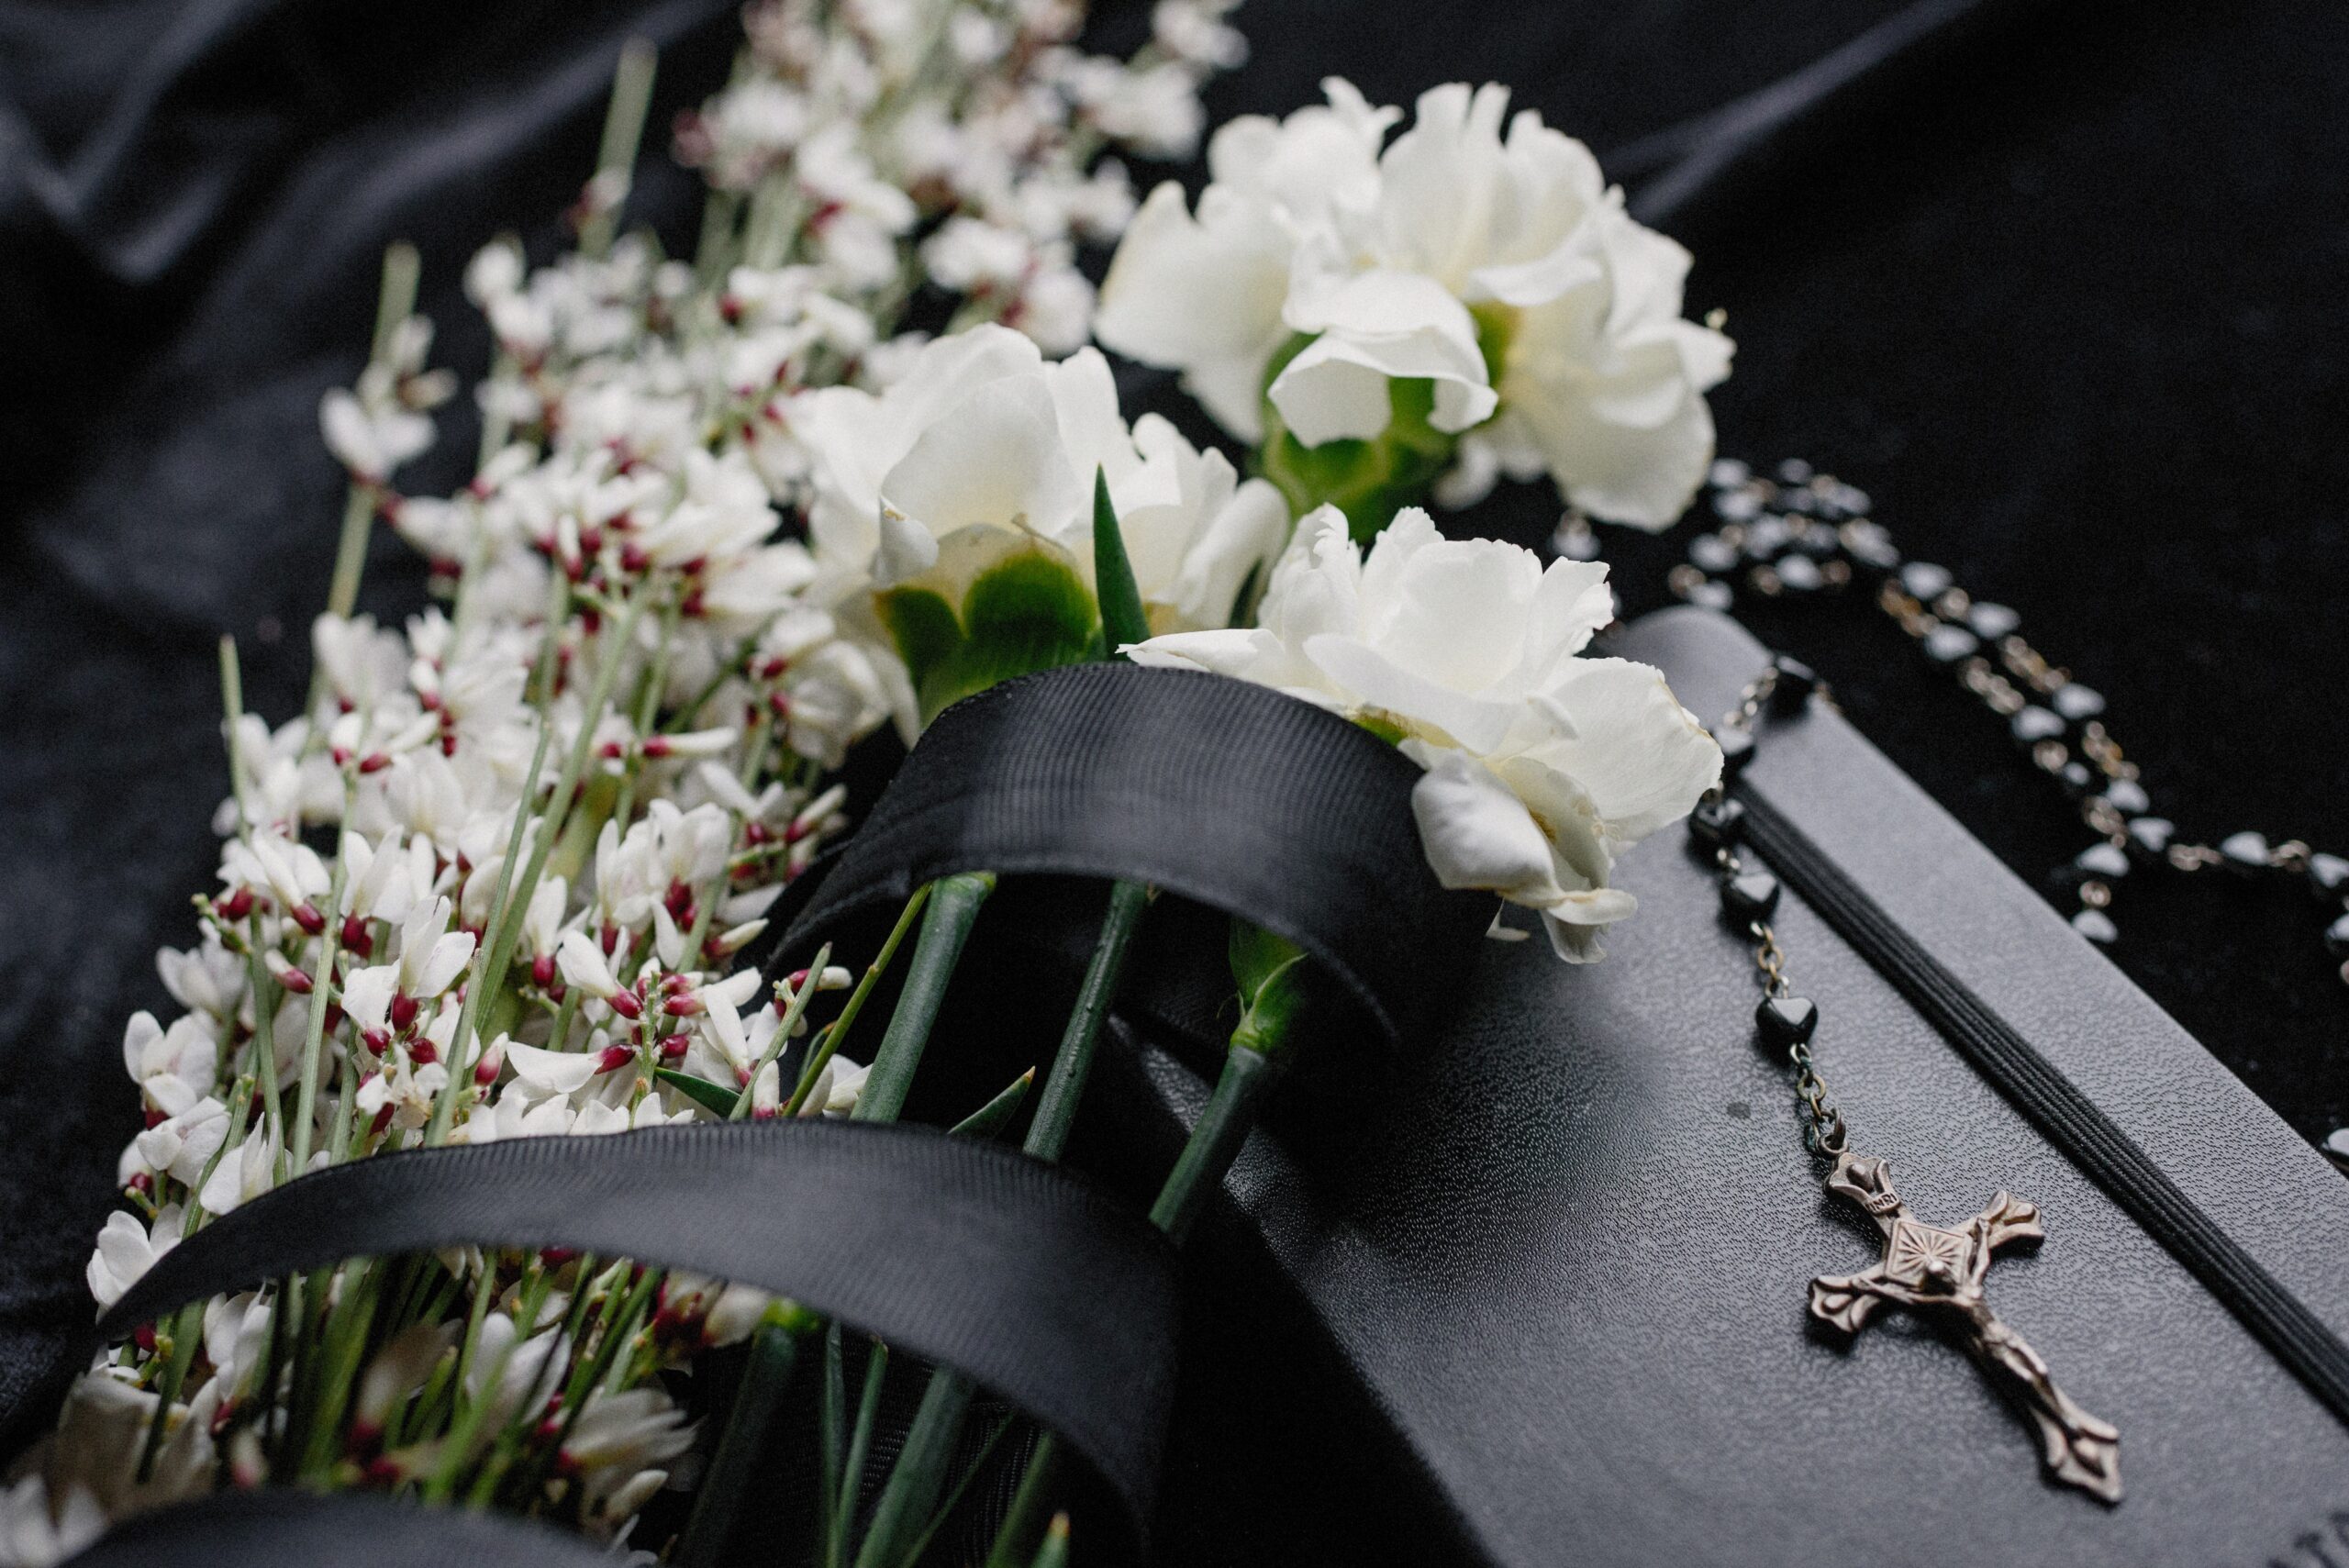 How To Choose a Flower Arrangement for A Funeral?